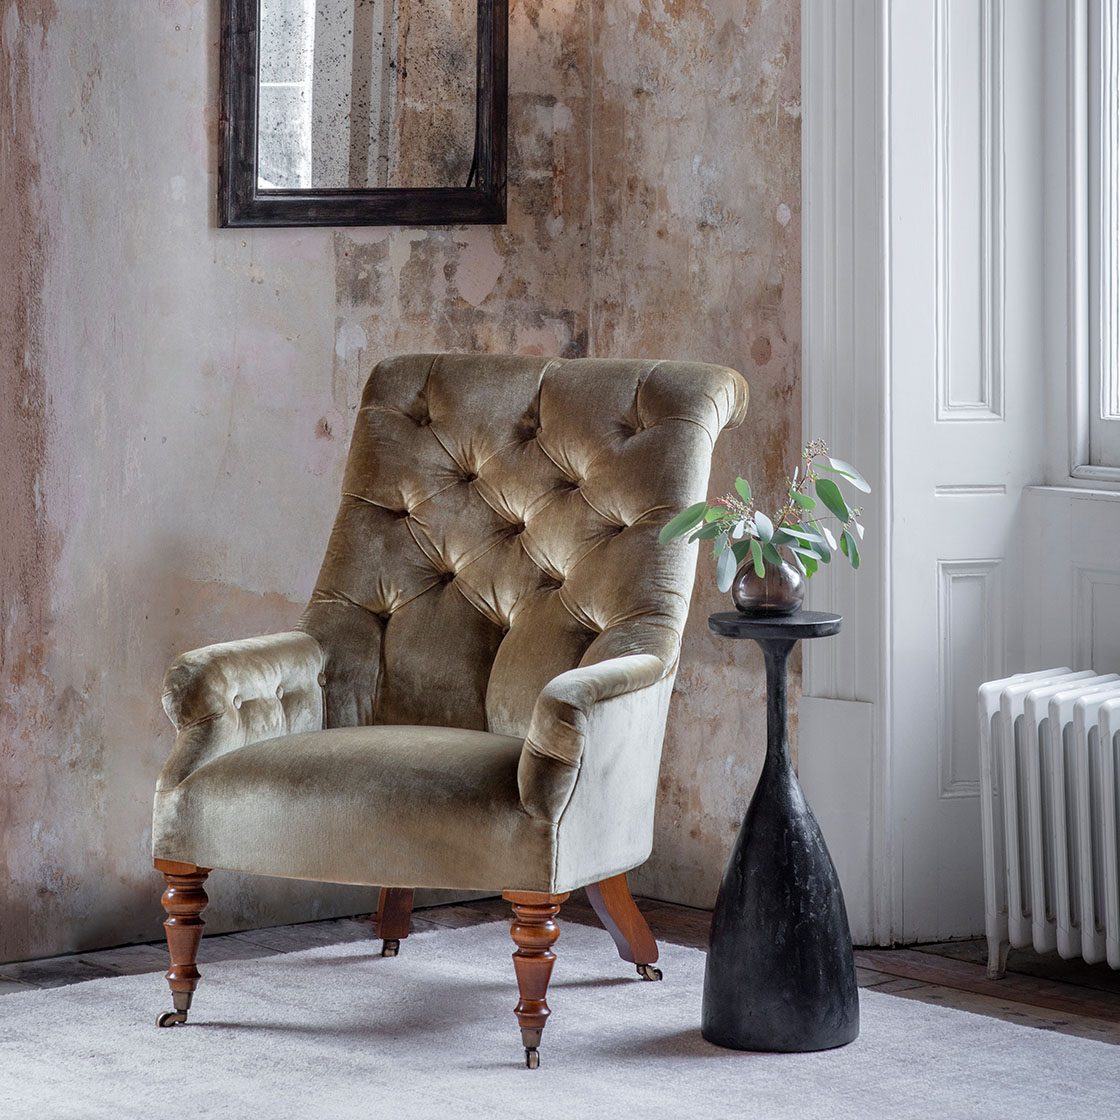 Waterford chair in Capri silk velvet - French grey with Oakleaf light and Arcus mirror - Beaumont & Fletcher